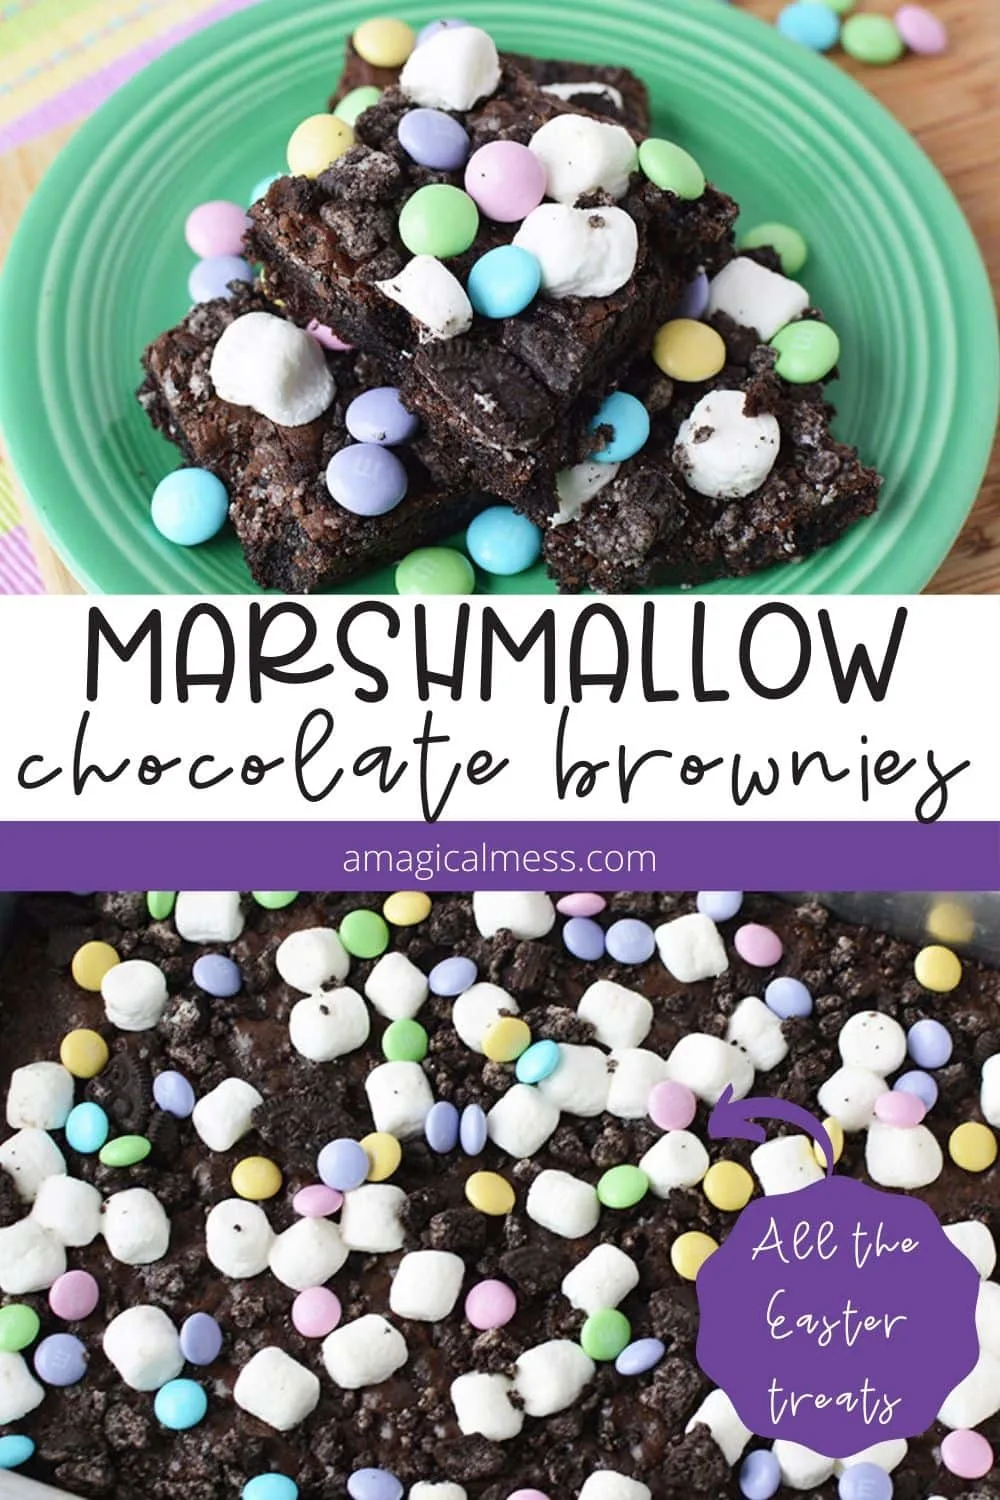 Marshmallow brownies on a plate and in a pan